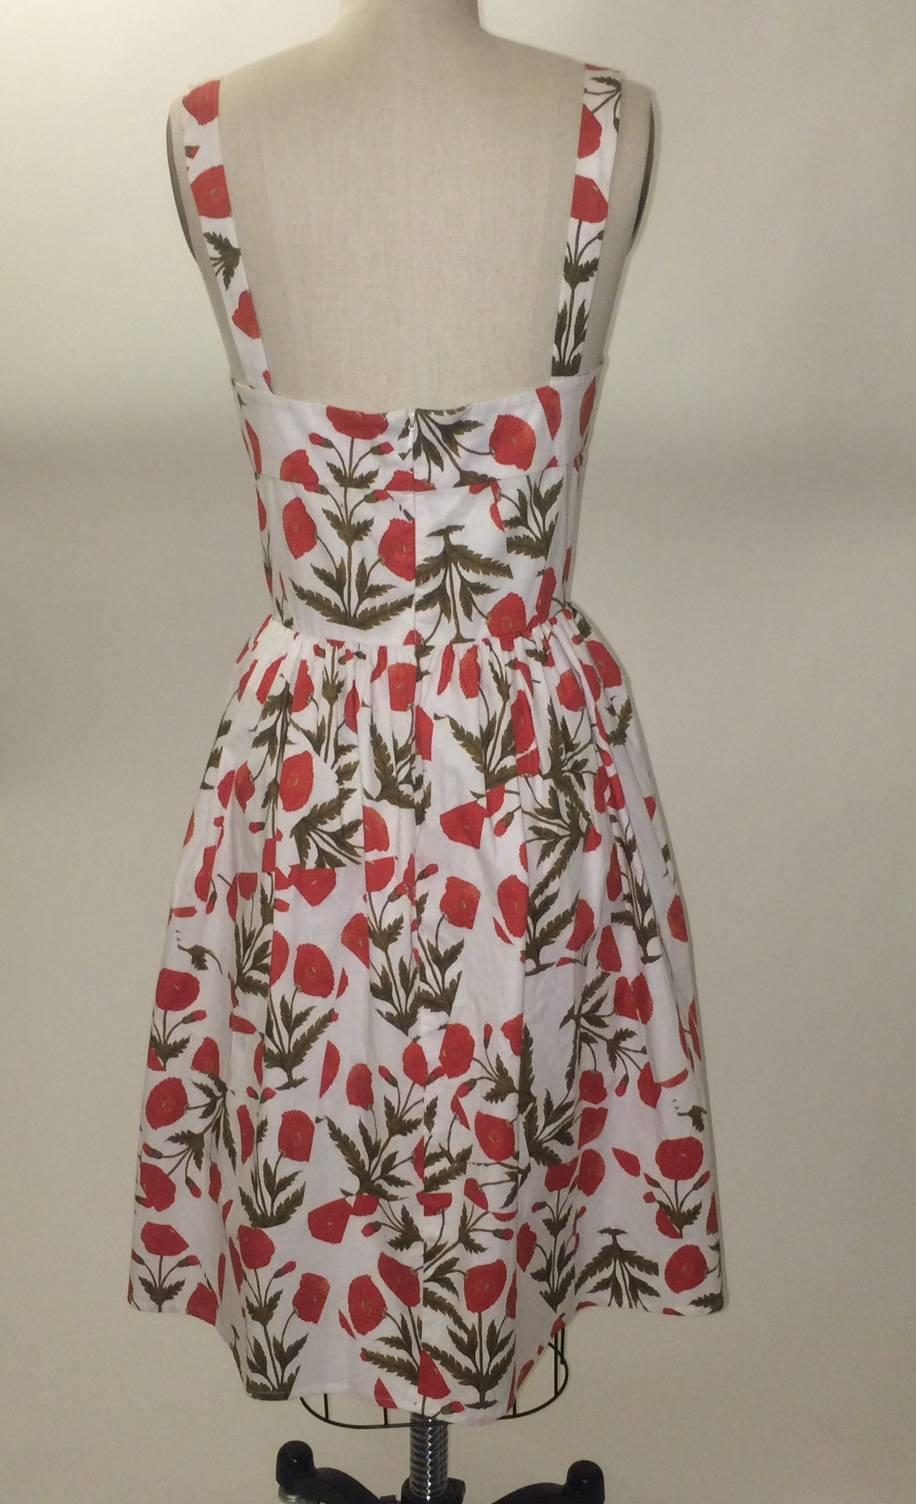 Oscar de la Renta red poppy print cotton sundress from the Spring 2102 collection. Hidden side pockets. Back zip.

96% cotton, 4% spandex.

Made in USA.

Size 12, runs small (maybe more like a 10.) See measurements. 
Light stretch,